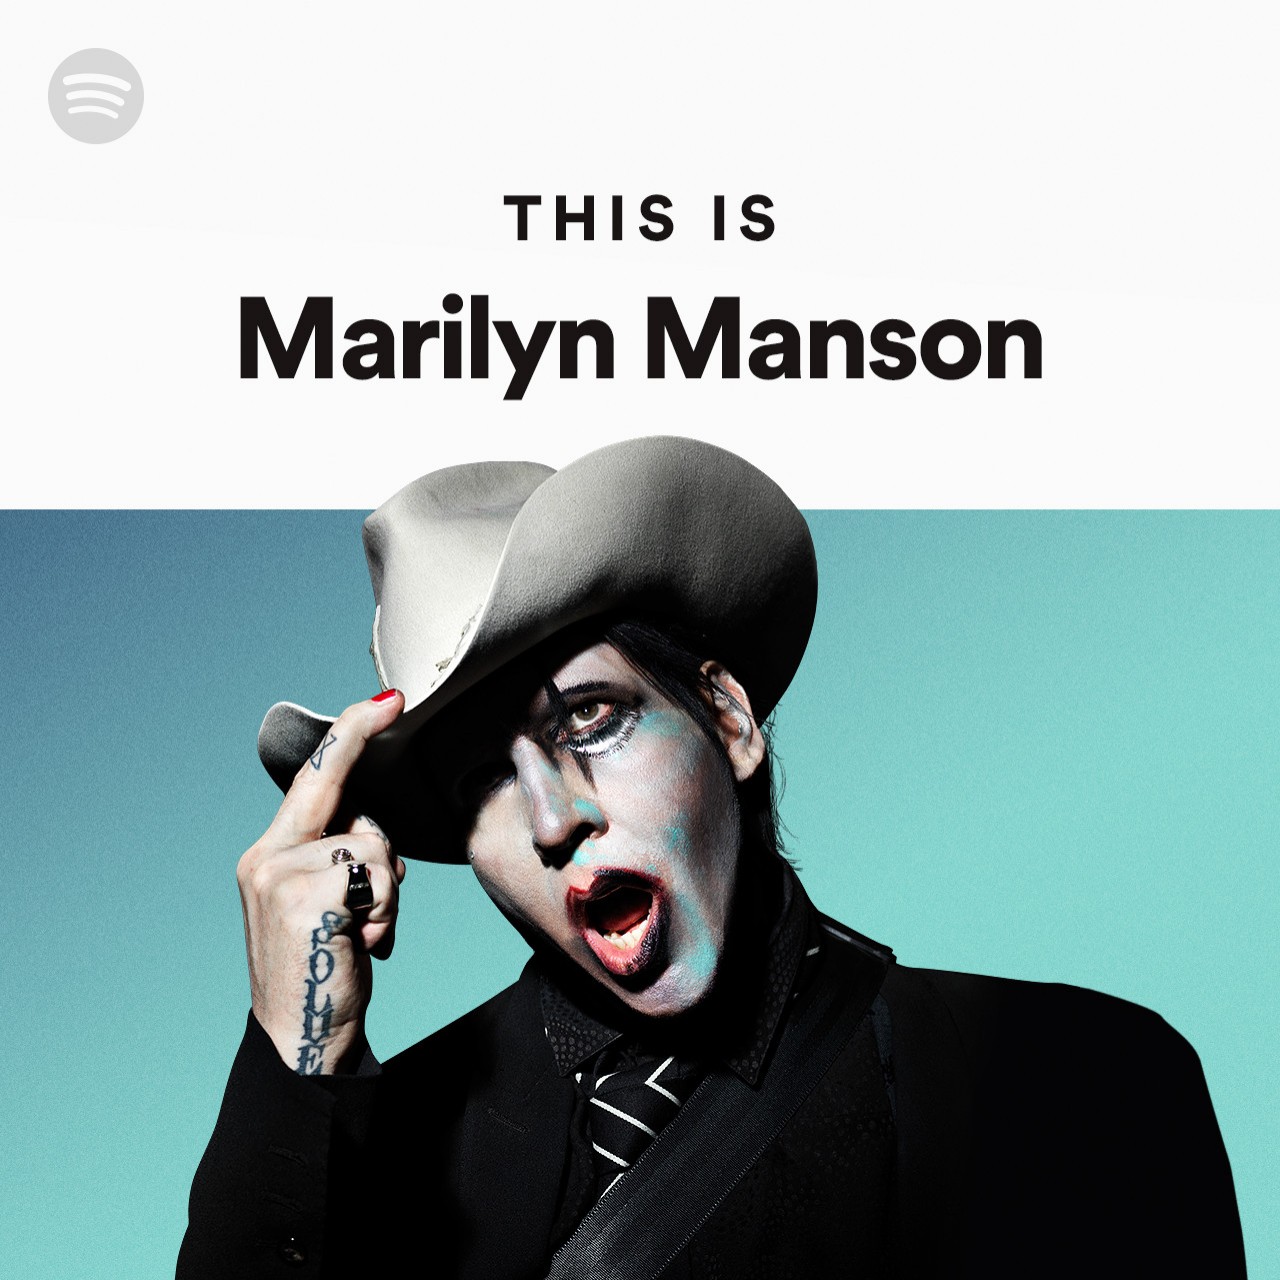 This Is Marilyn Manson